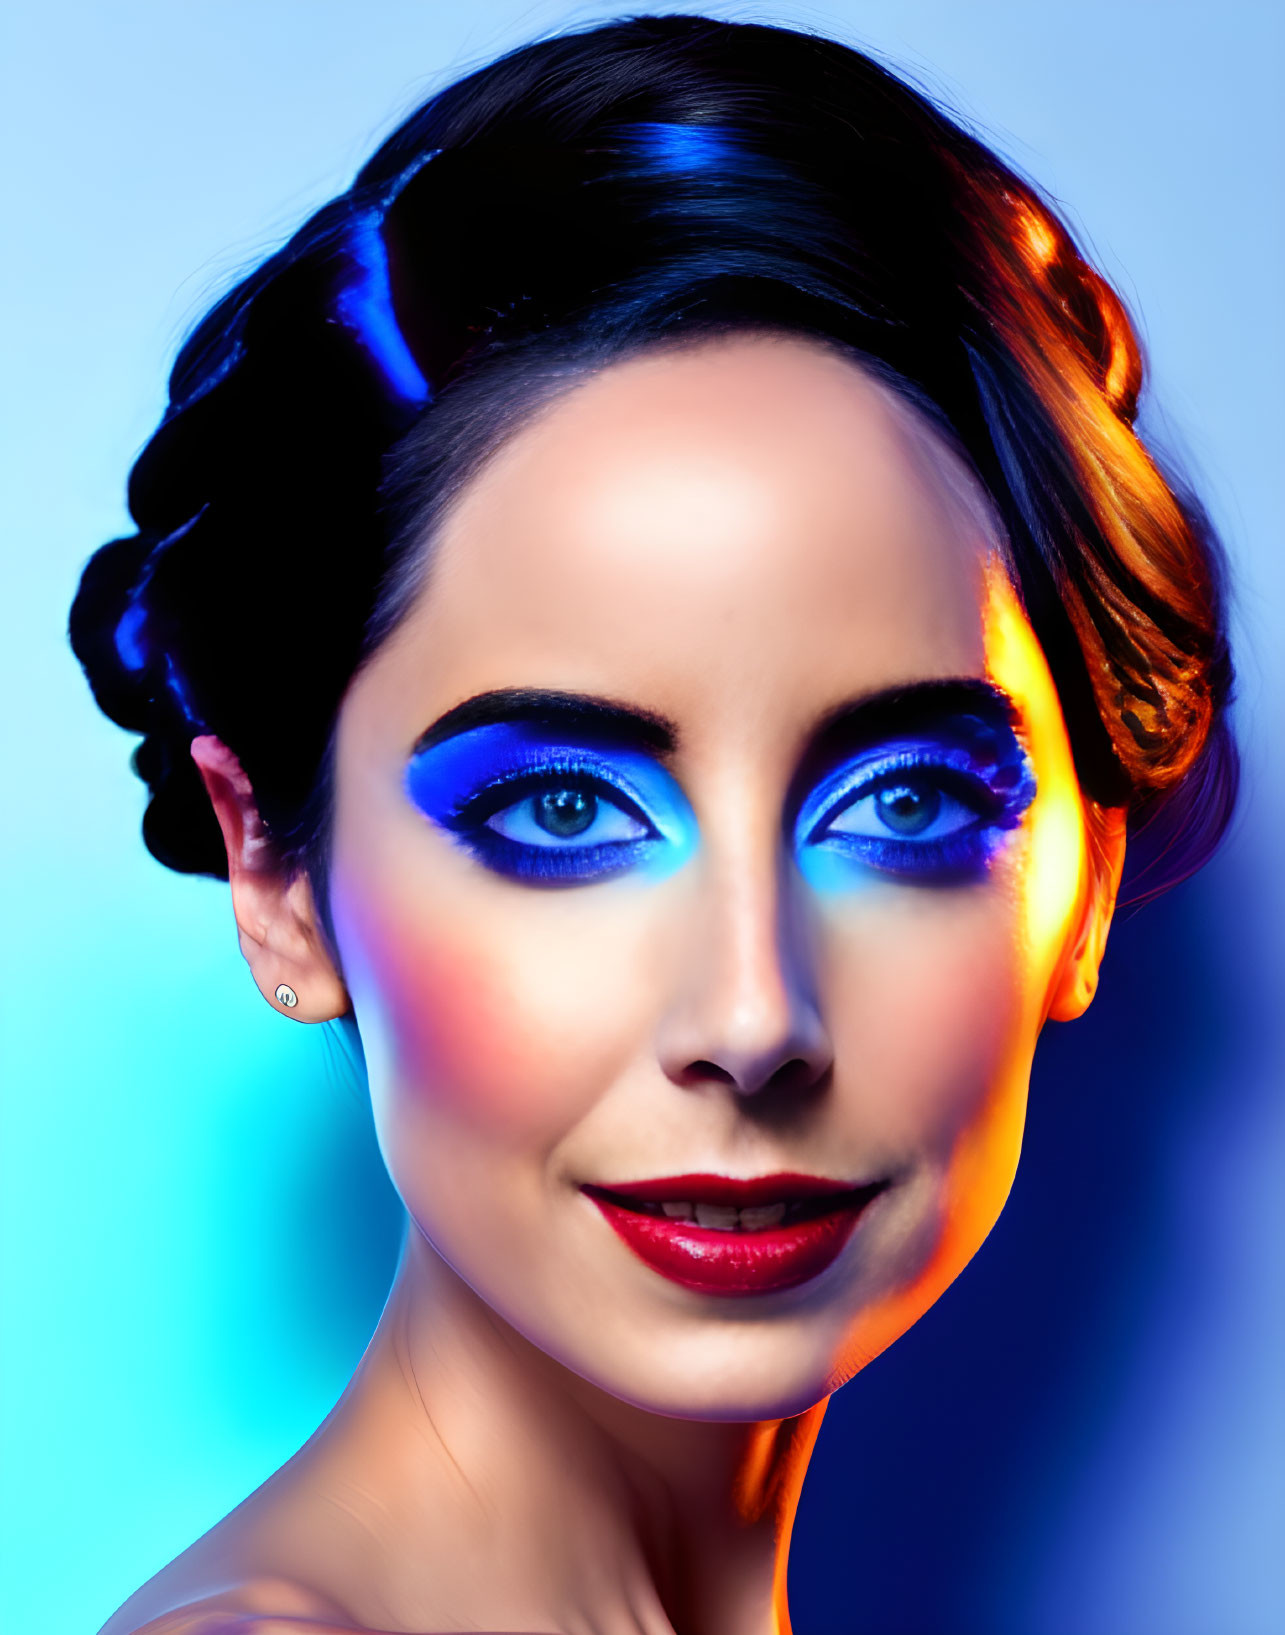 Striking blue eye makeup and red lips on woman against gradient background